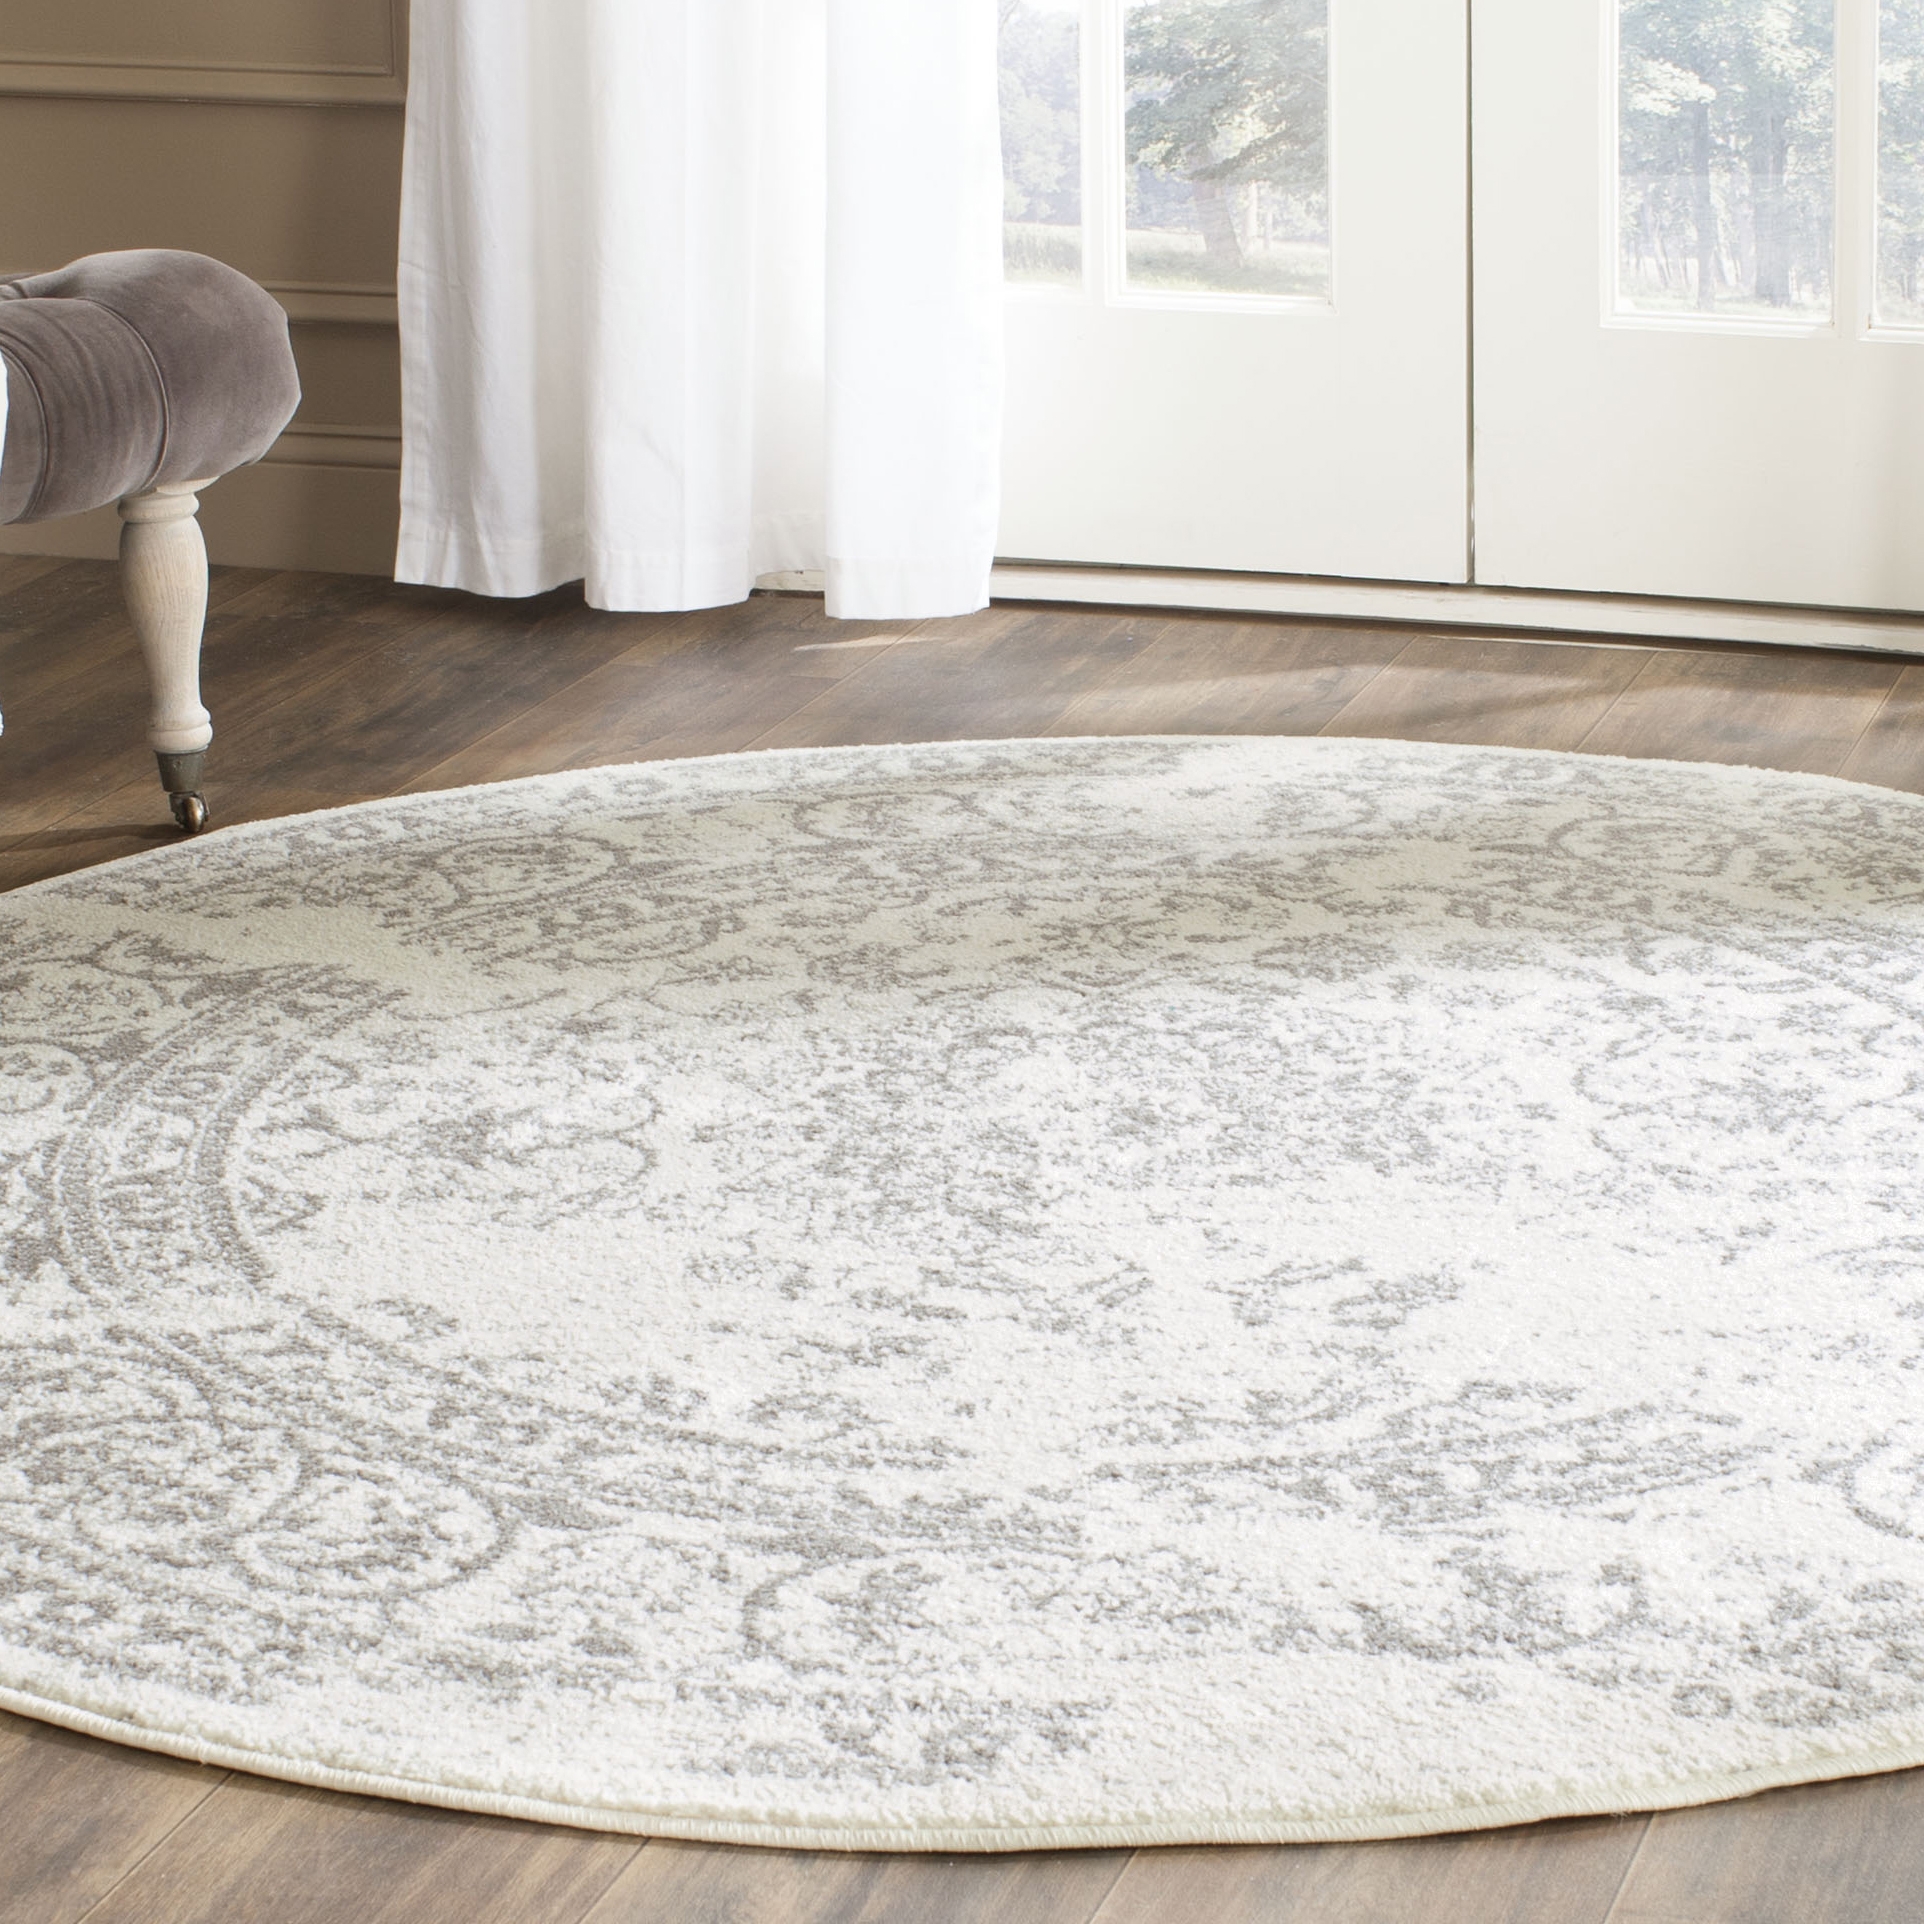 Arlo Home Woven Area Rug, ADR101B, Ivory/Silver,  8' X 8' Round - Image 1